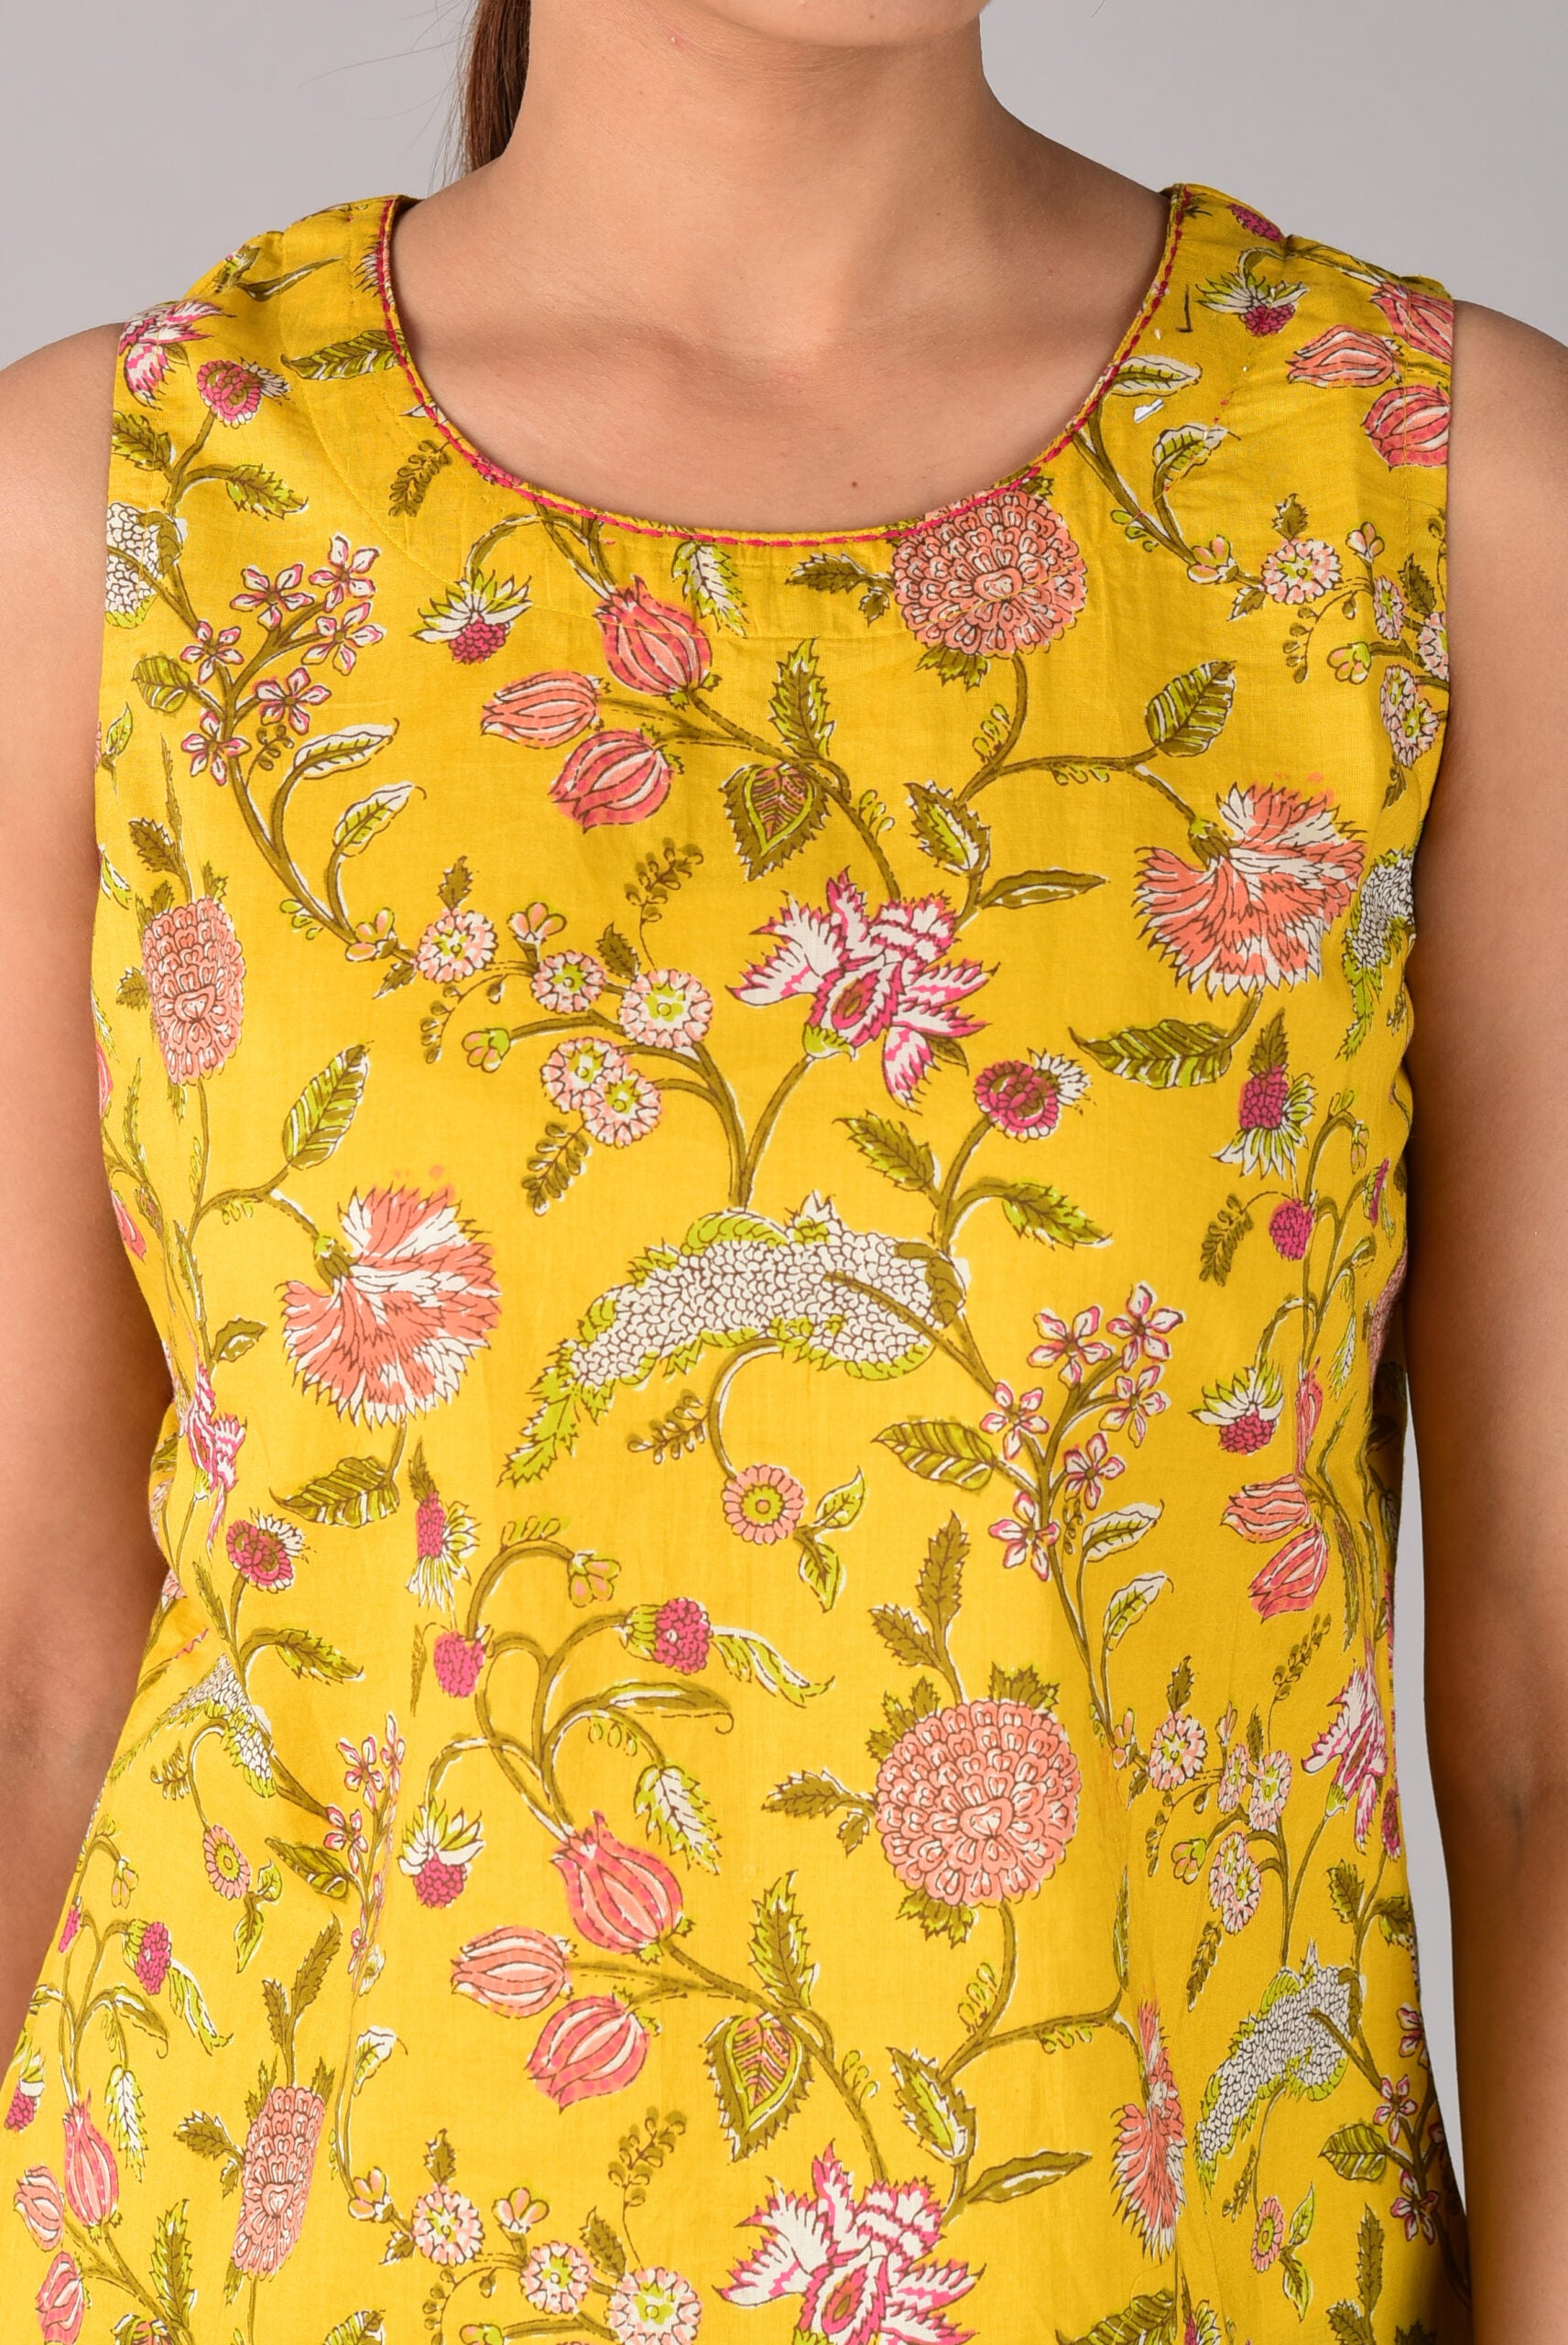 Floral Printed Sleeveless Top